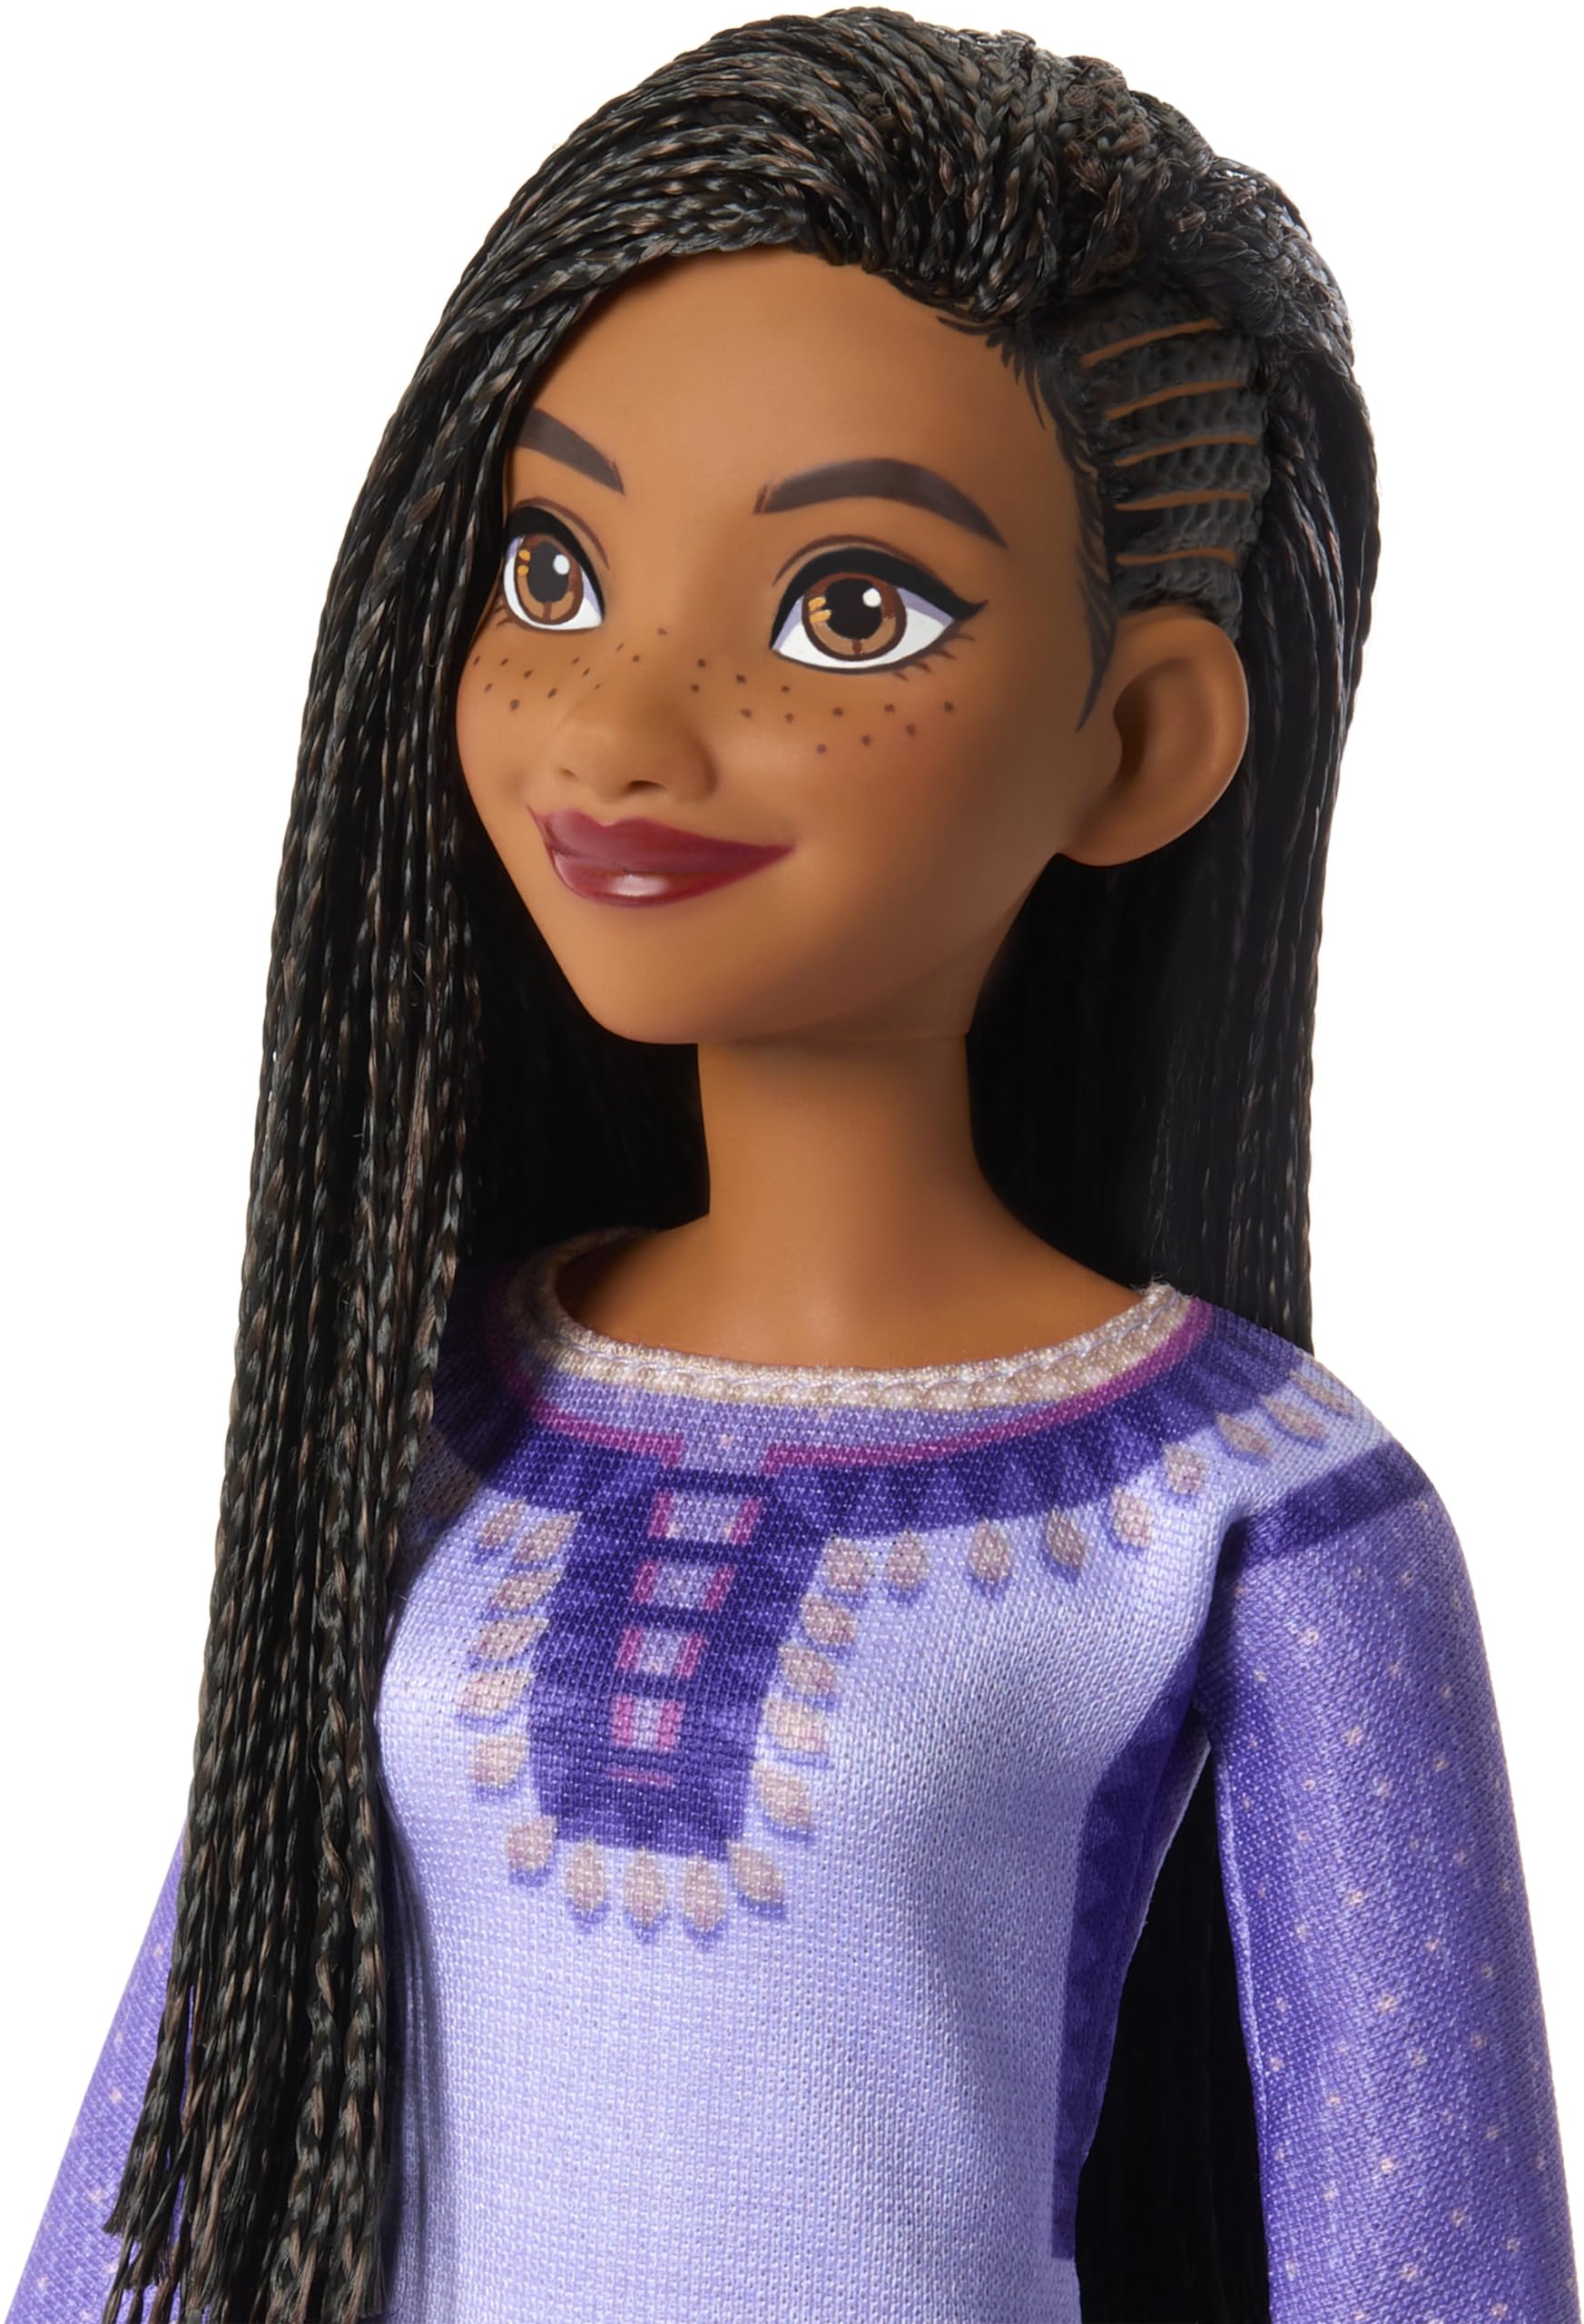 Mattel Disney's Wish Asha of Rosas Posable Fashion Doll with Natural Hair, Including Removable Clothes, Shoes, and Accessories